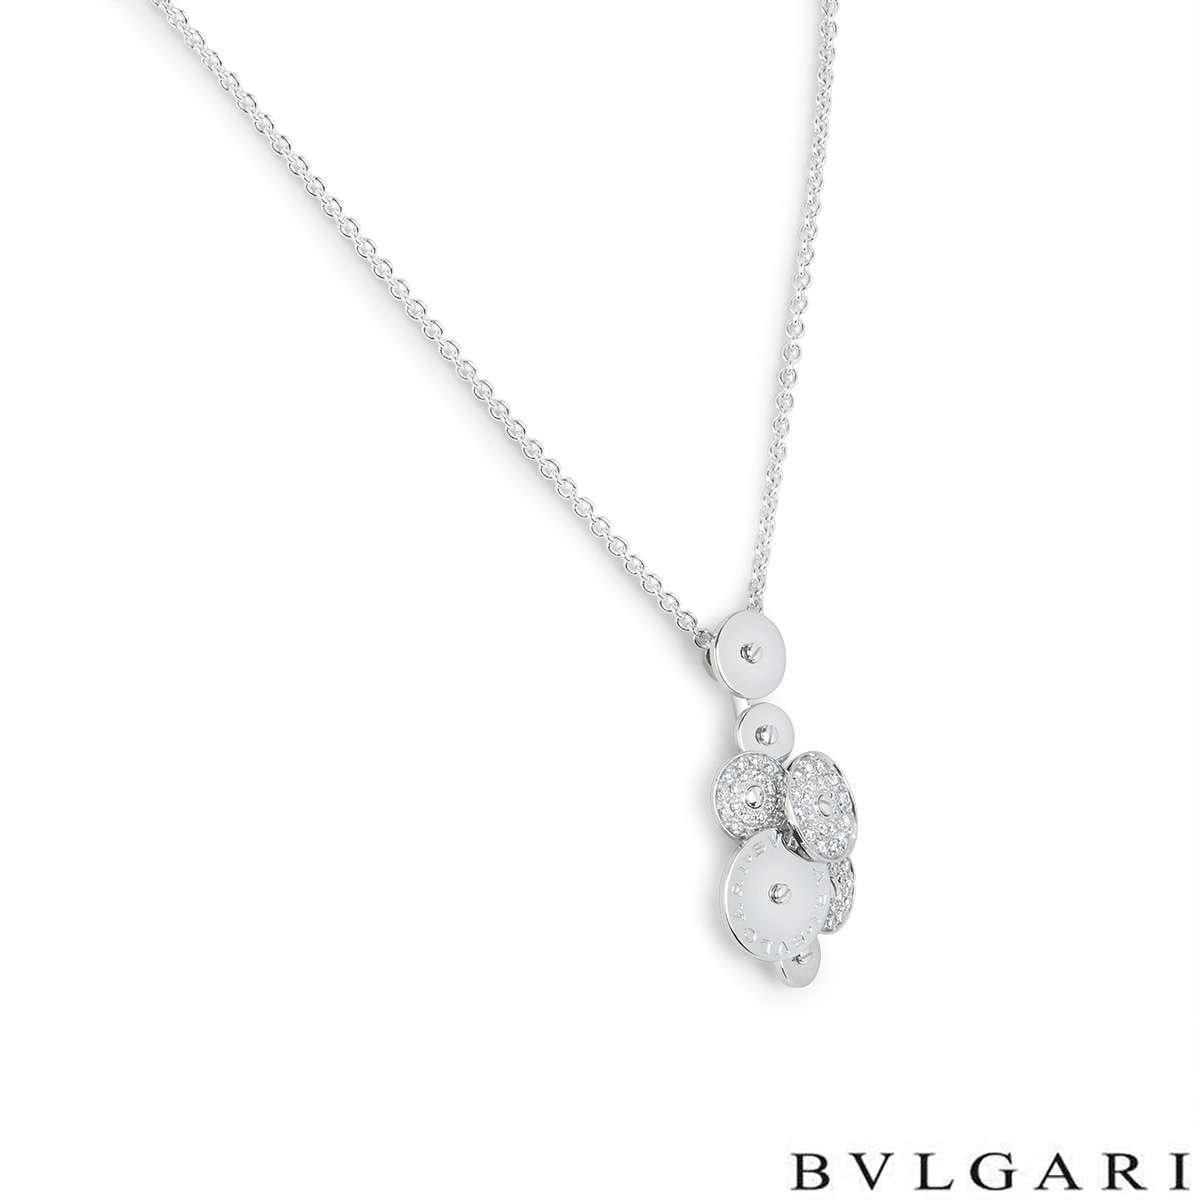 An 18k white gold pendant from the Bvlgari Cicladi collection. The pendant is composed of a cluster of 7 circular spinning discs, each alternating in size. The largest of the discs is engraved with the Bvlgari Bvlgari logo and three of the discs are